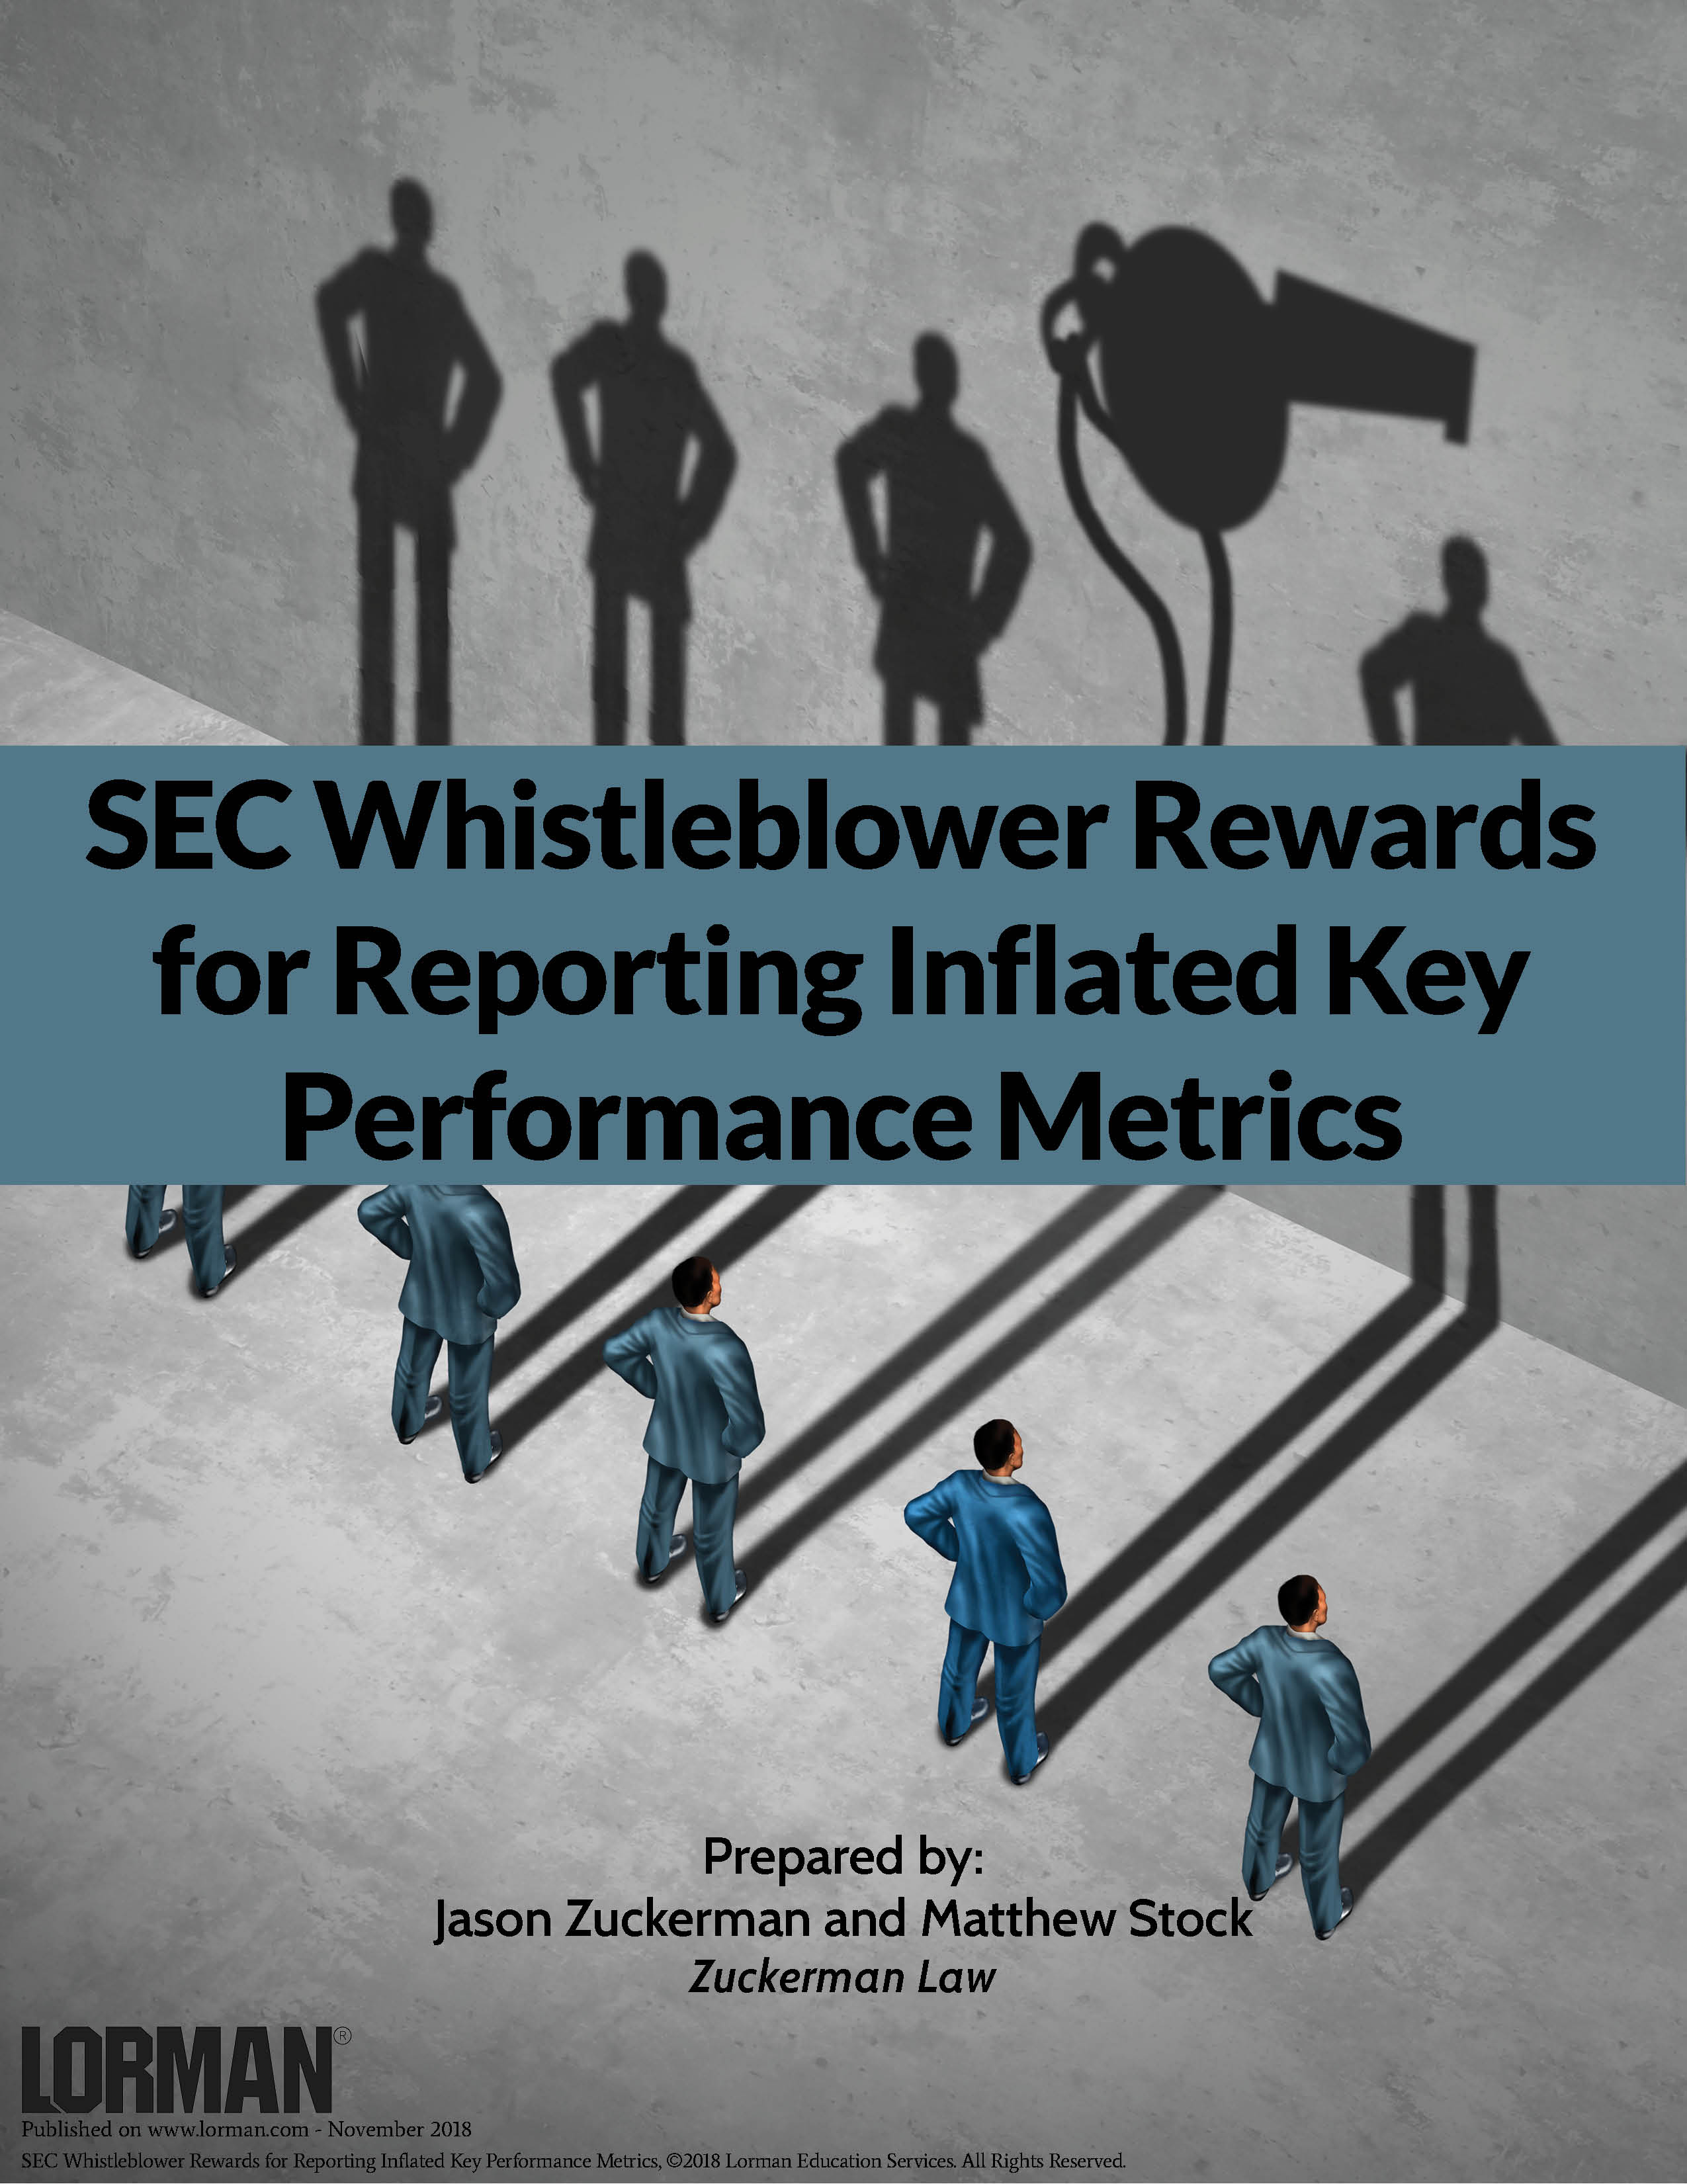 SEC Whistleblower Rewards for Reporting Inflated Key Performance Metrics